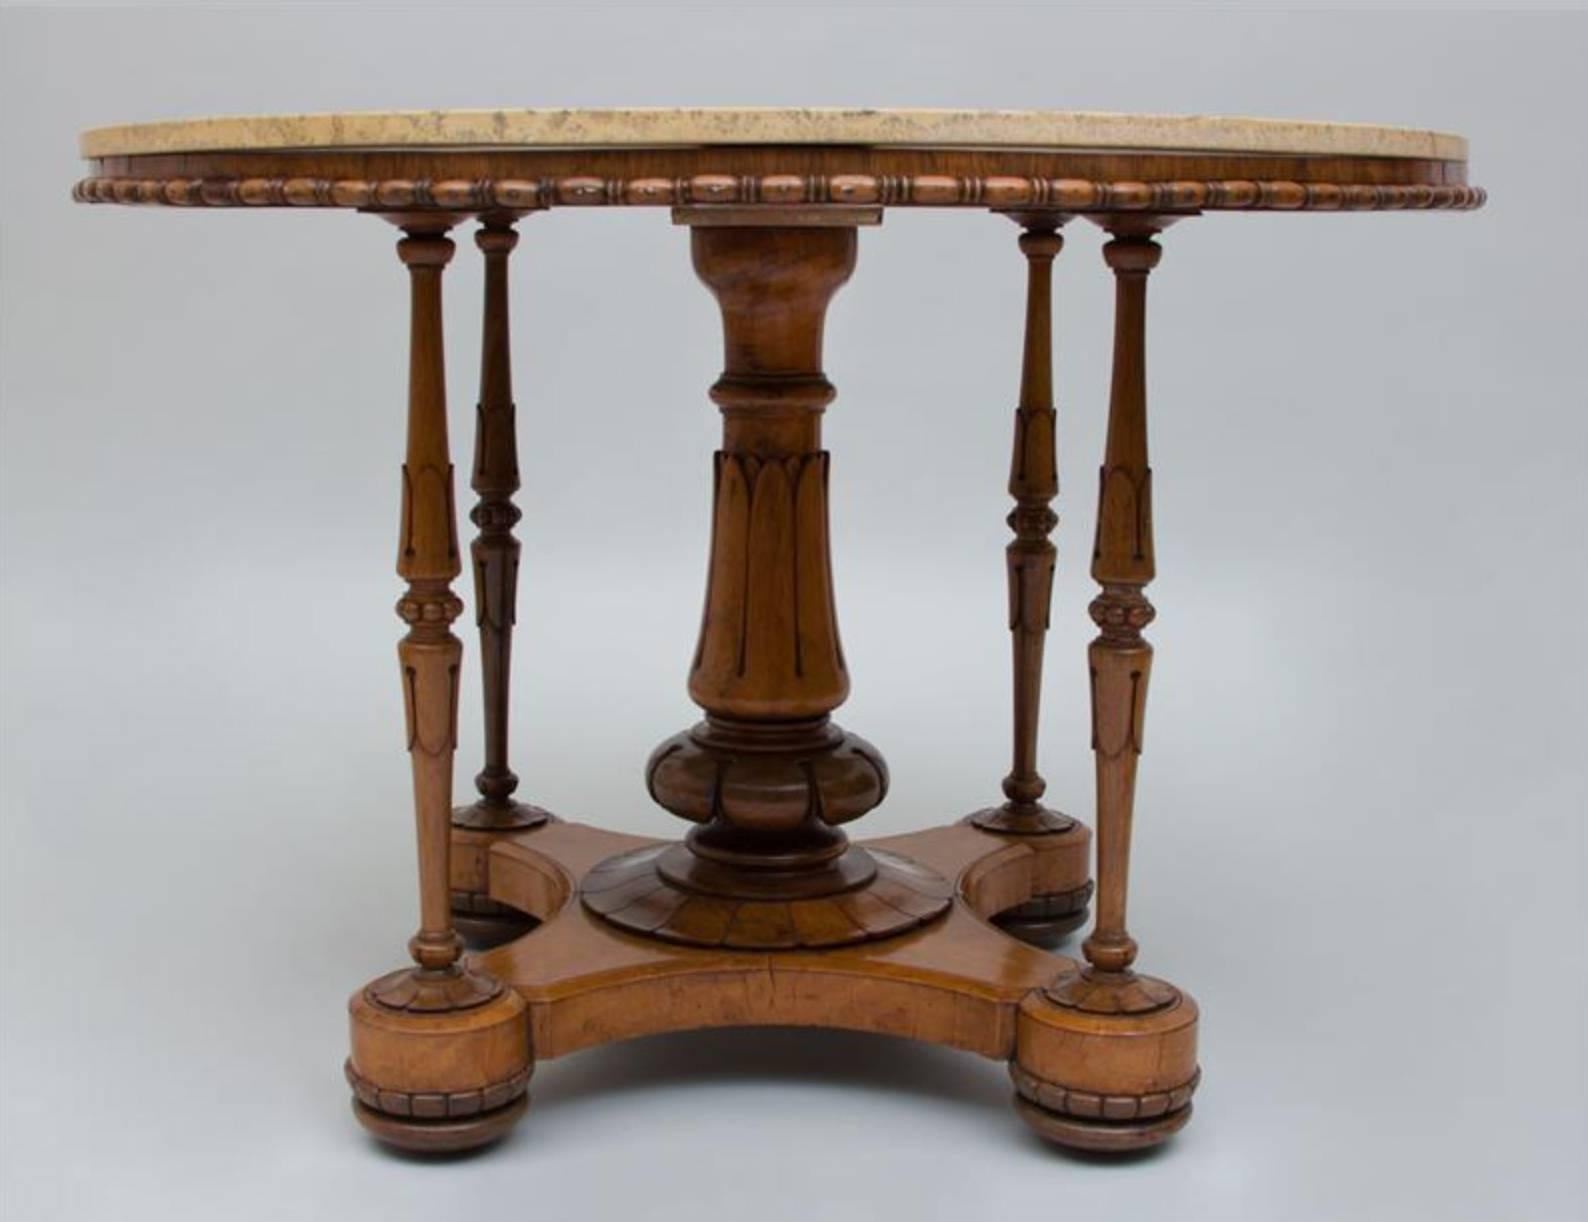 A fine English William IV
Carved bird's-eye maple and rosewood centre table,
circa 1835

Fitted with a inlaid scagliola top.
 
measure: Height 29 in x diameter 42 in.  

Provenance:
Property from a Private Greenwich, CT Collector 
Le